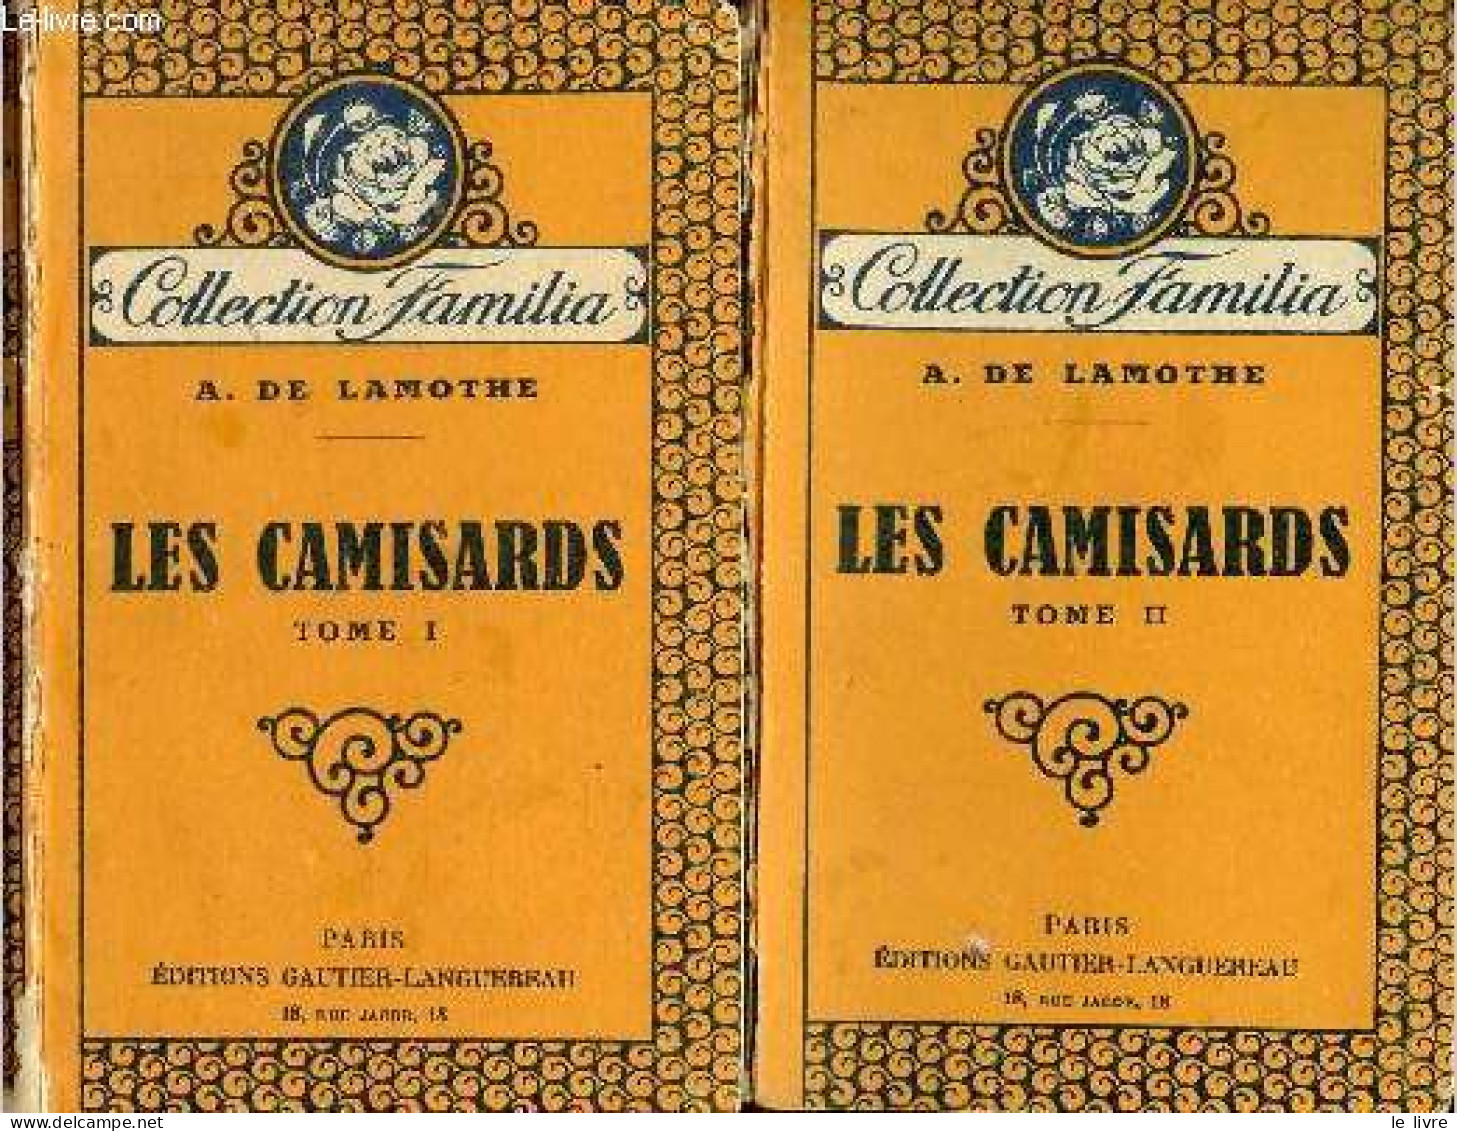 Les Camisards - Tome 1 + Tome 2 (2 Volumes) - Collection Familia. - A.de Lamothe - 1939 - Valérian